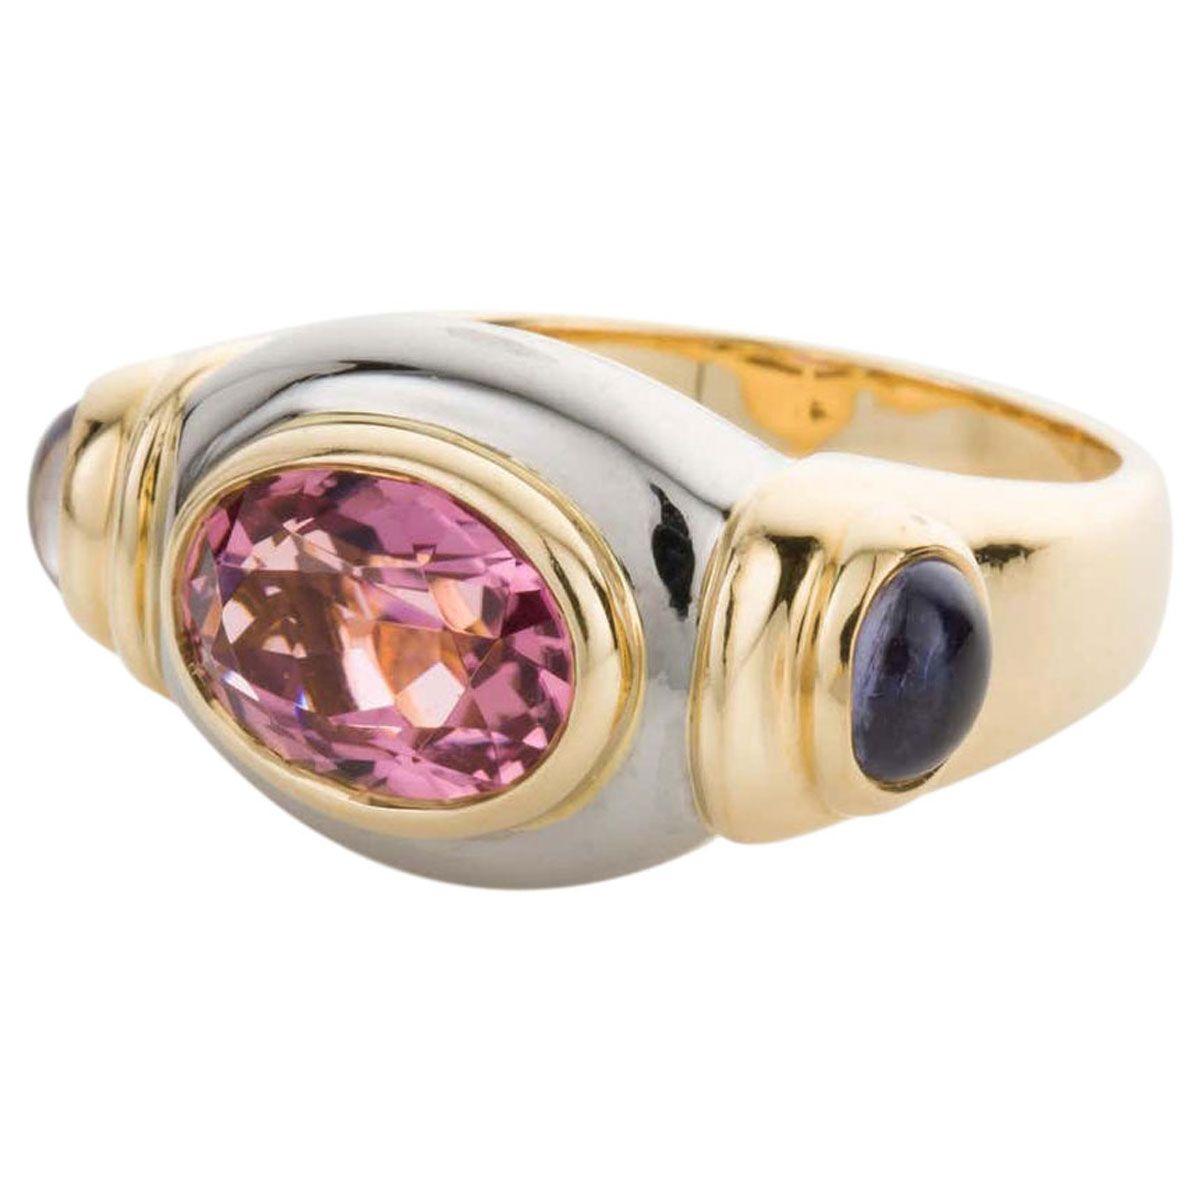 A bold look on the finger but still has elegance with its rounded lines and beautiful gemstones. A precisely faceted pink tourmaline sits as the centre piece in this Italian beauty. Weighing approximately 2.15cts this oval cut gemstone has a certain